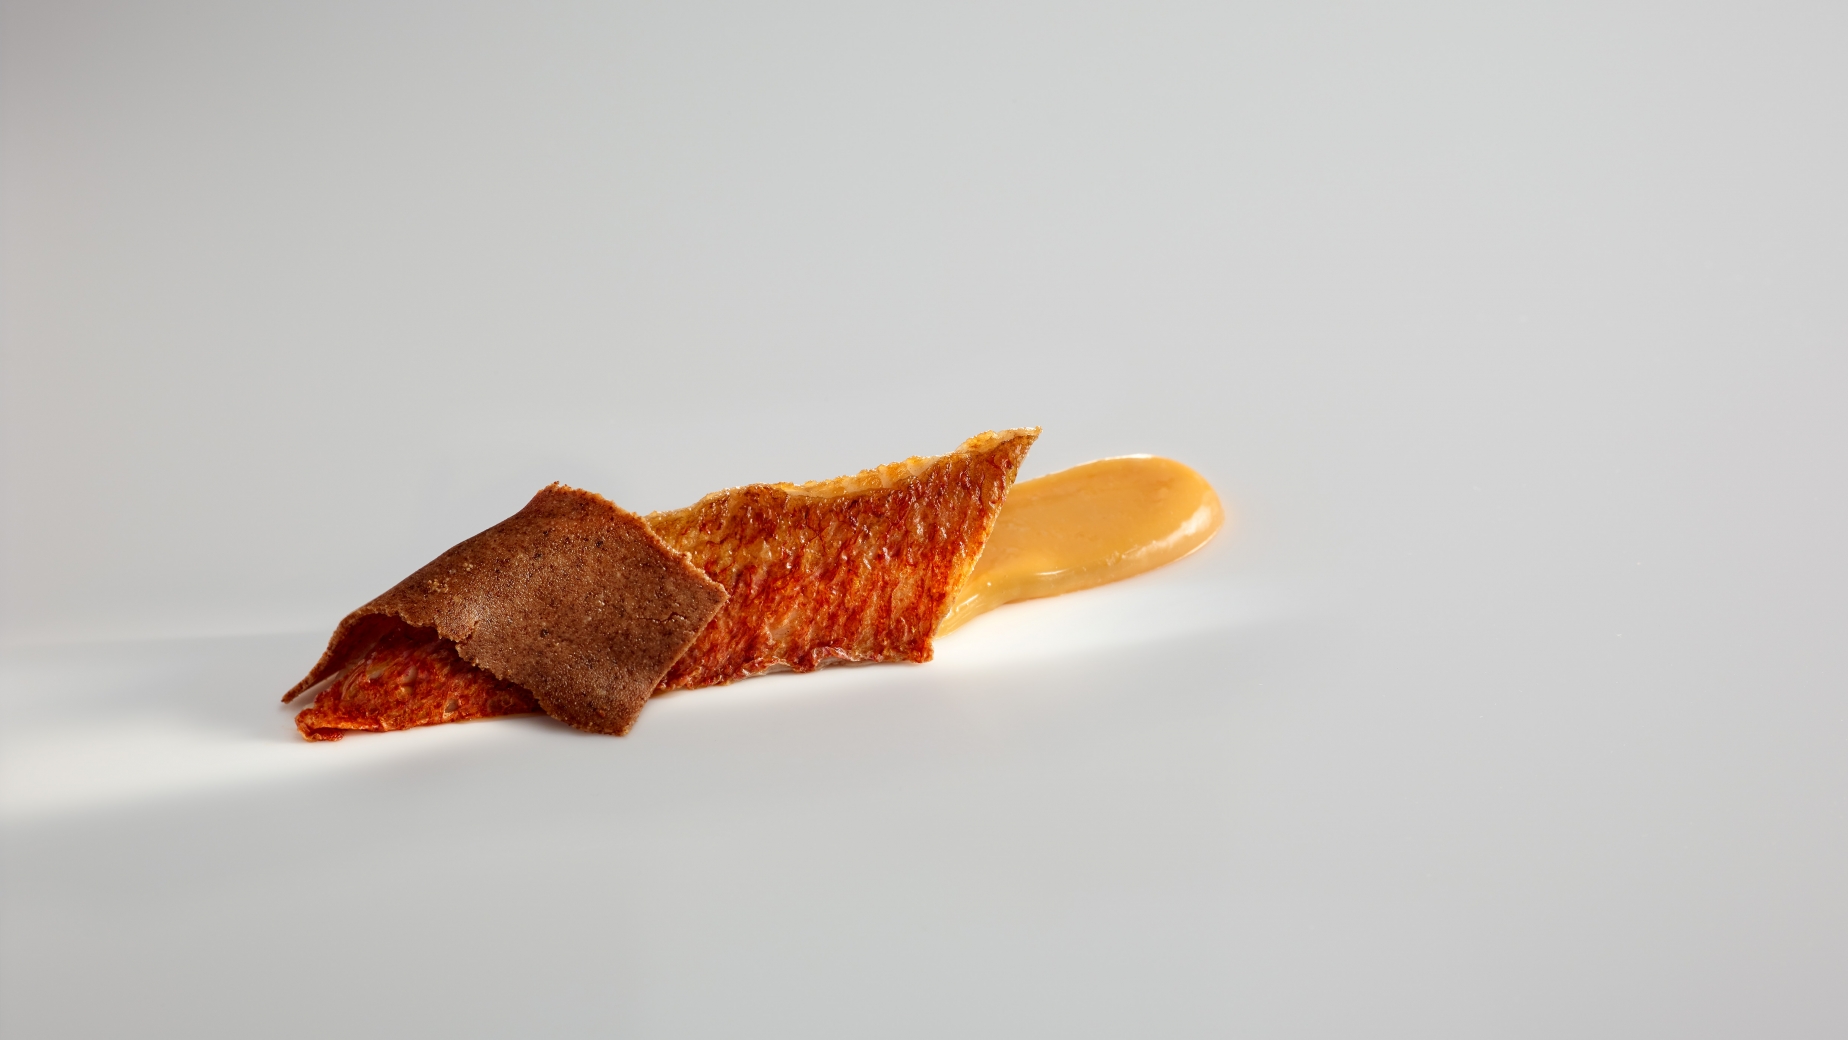 Red mullet in a butter of its own liver. Almonds and bread.
PHOTO: José Luis López de Zubiría / Mugaritz